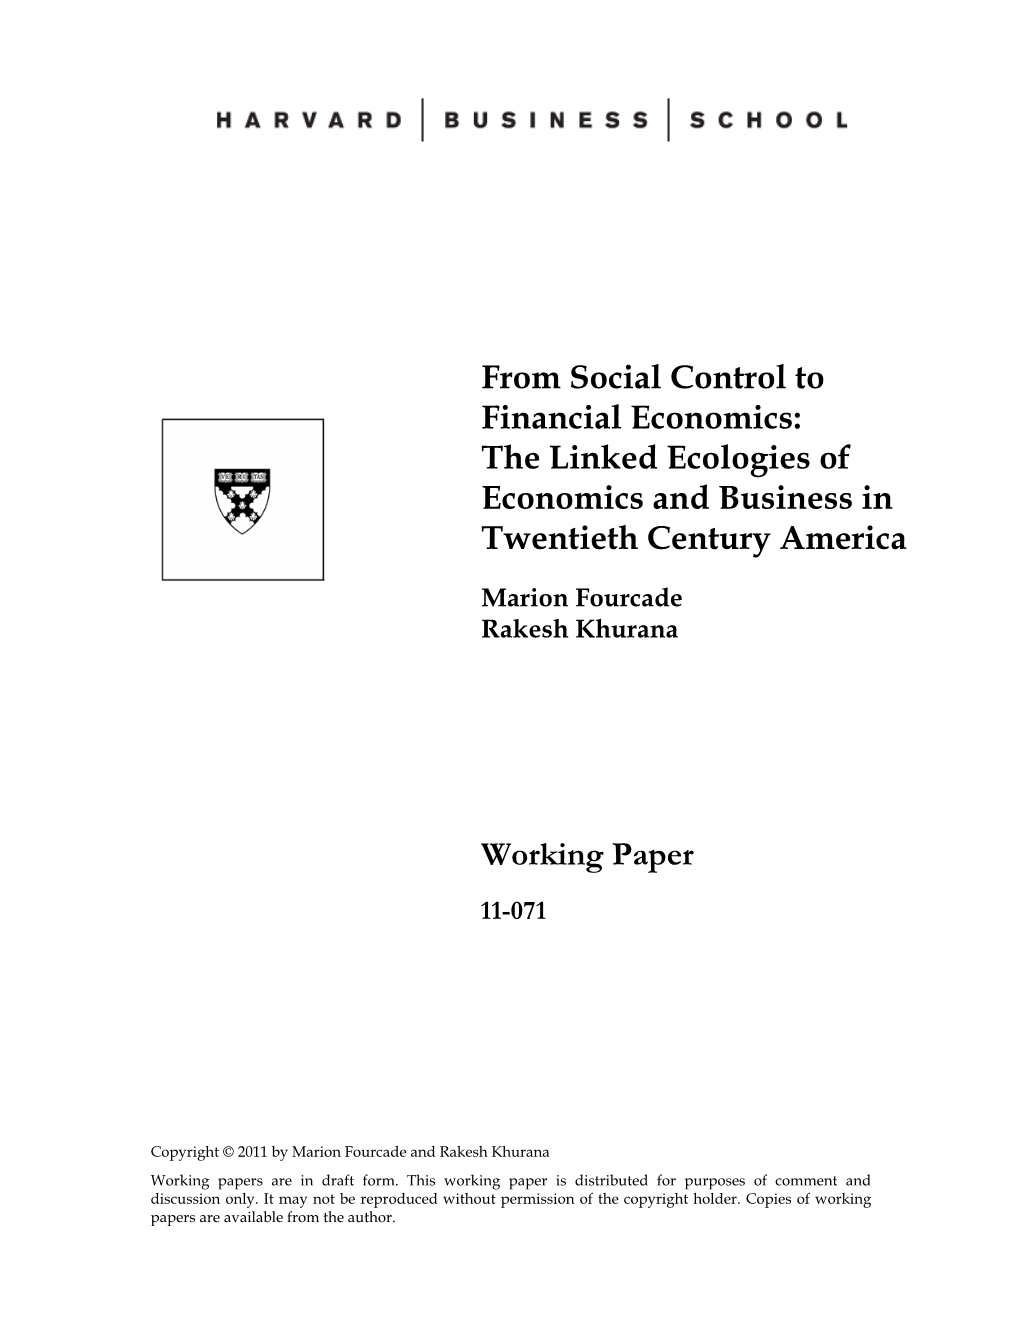 From Social Control to Financial Economics: the Linked Ecologies of Economics and Business in Twentieth Century America